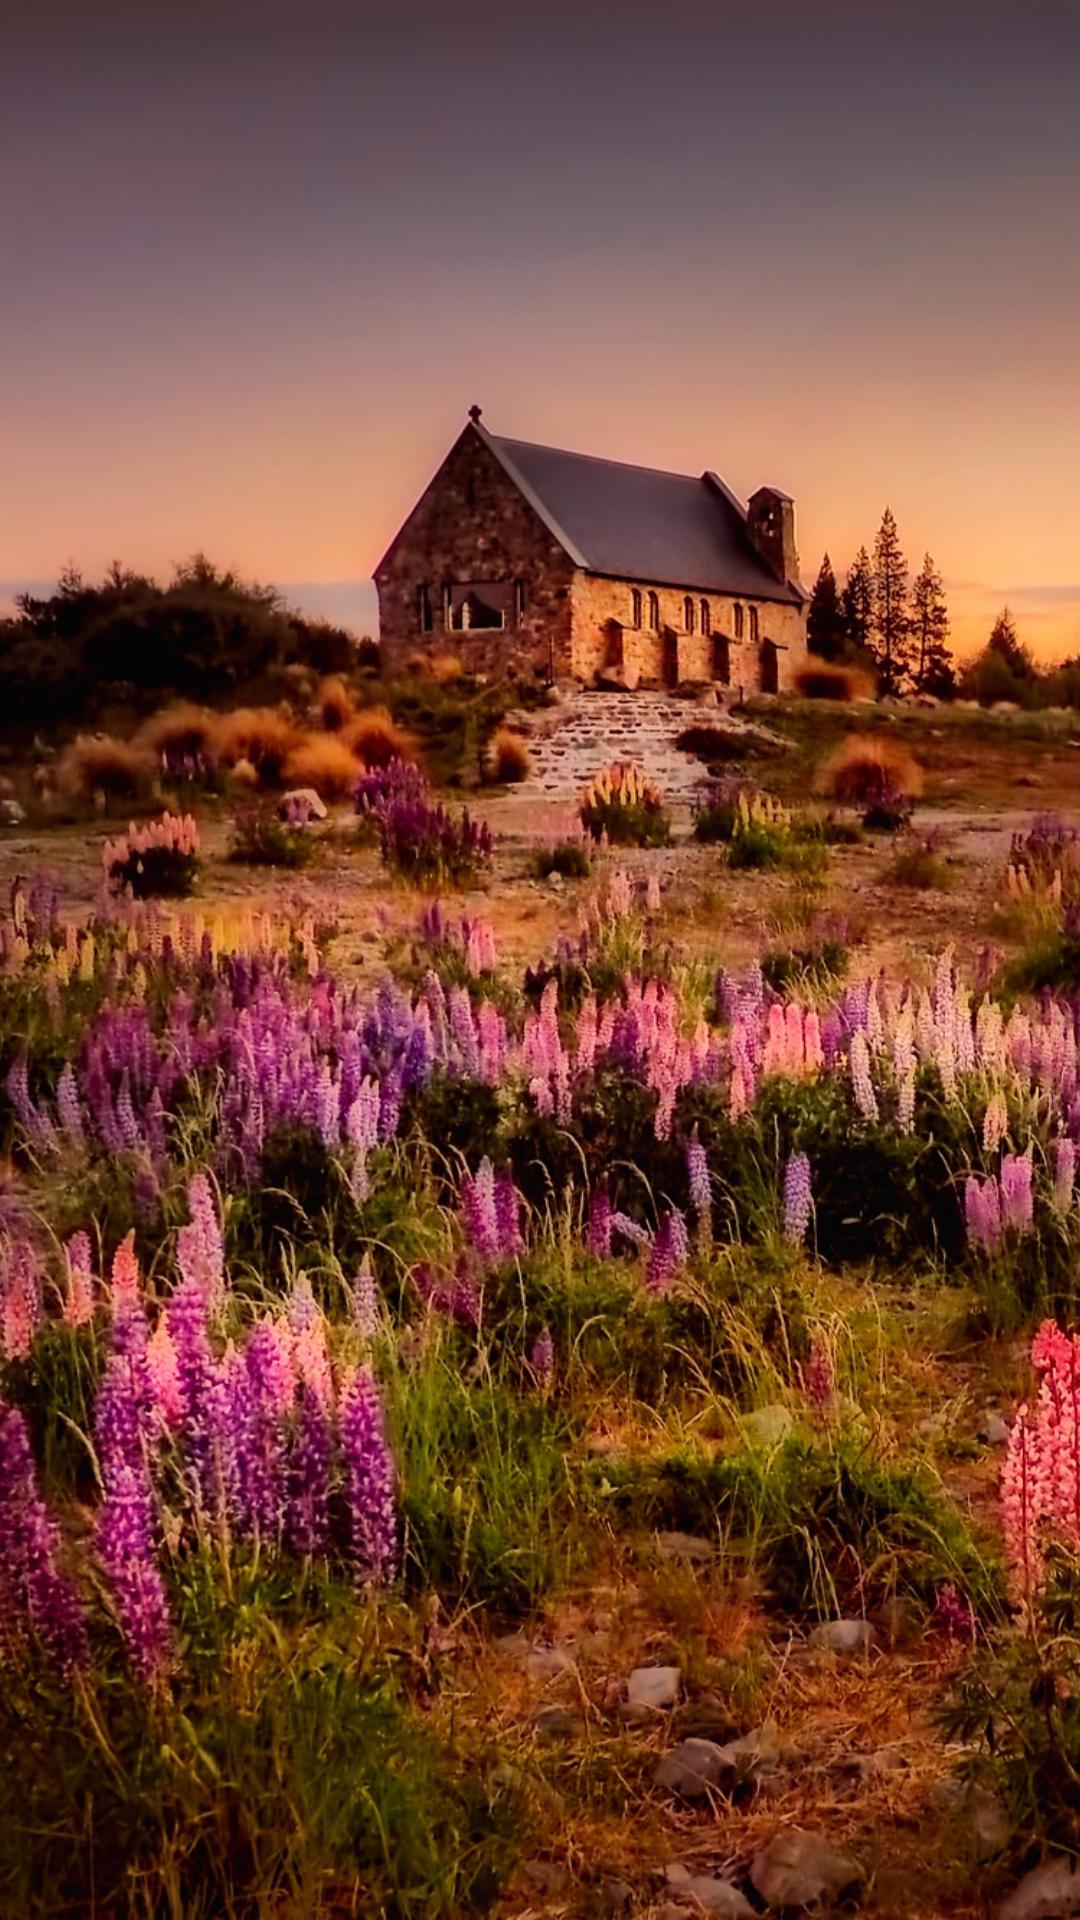 A house in the middle of a field with flowers. - Cottagecore